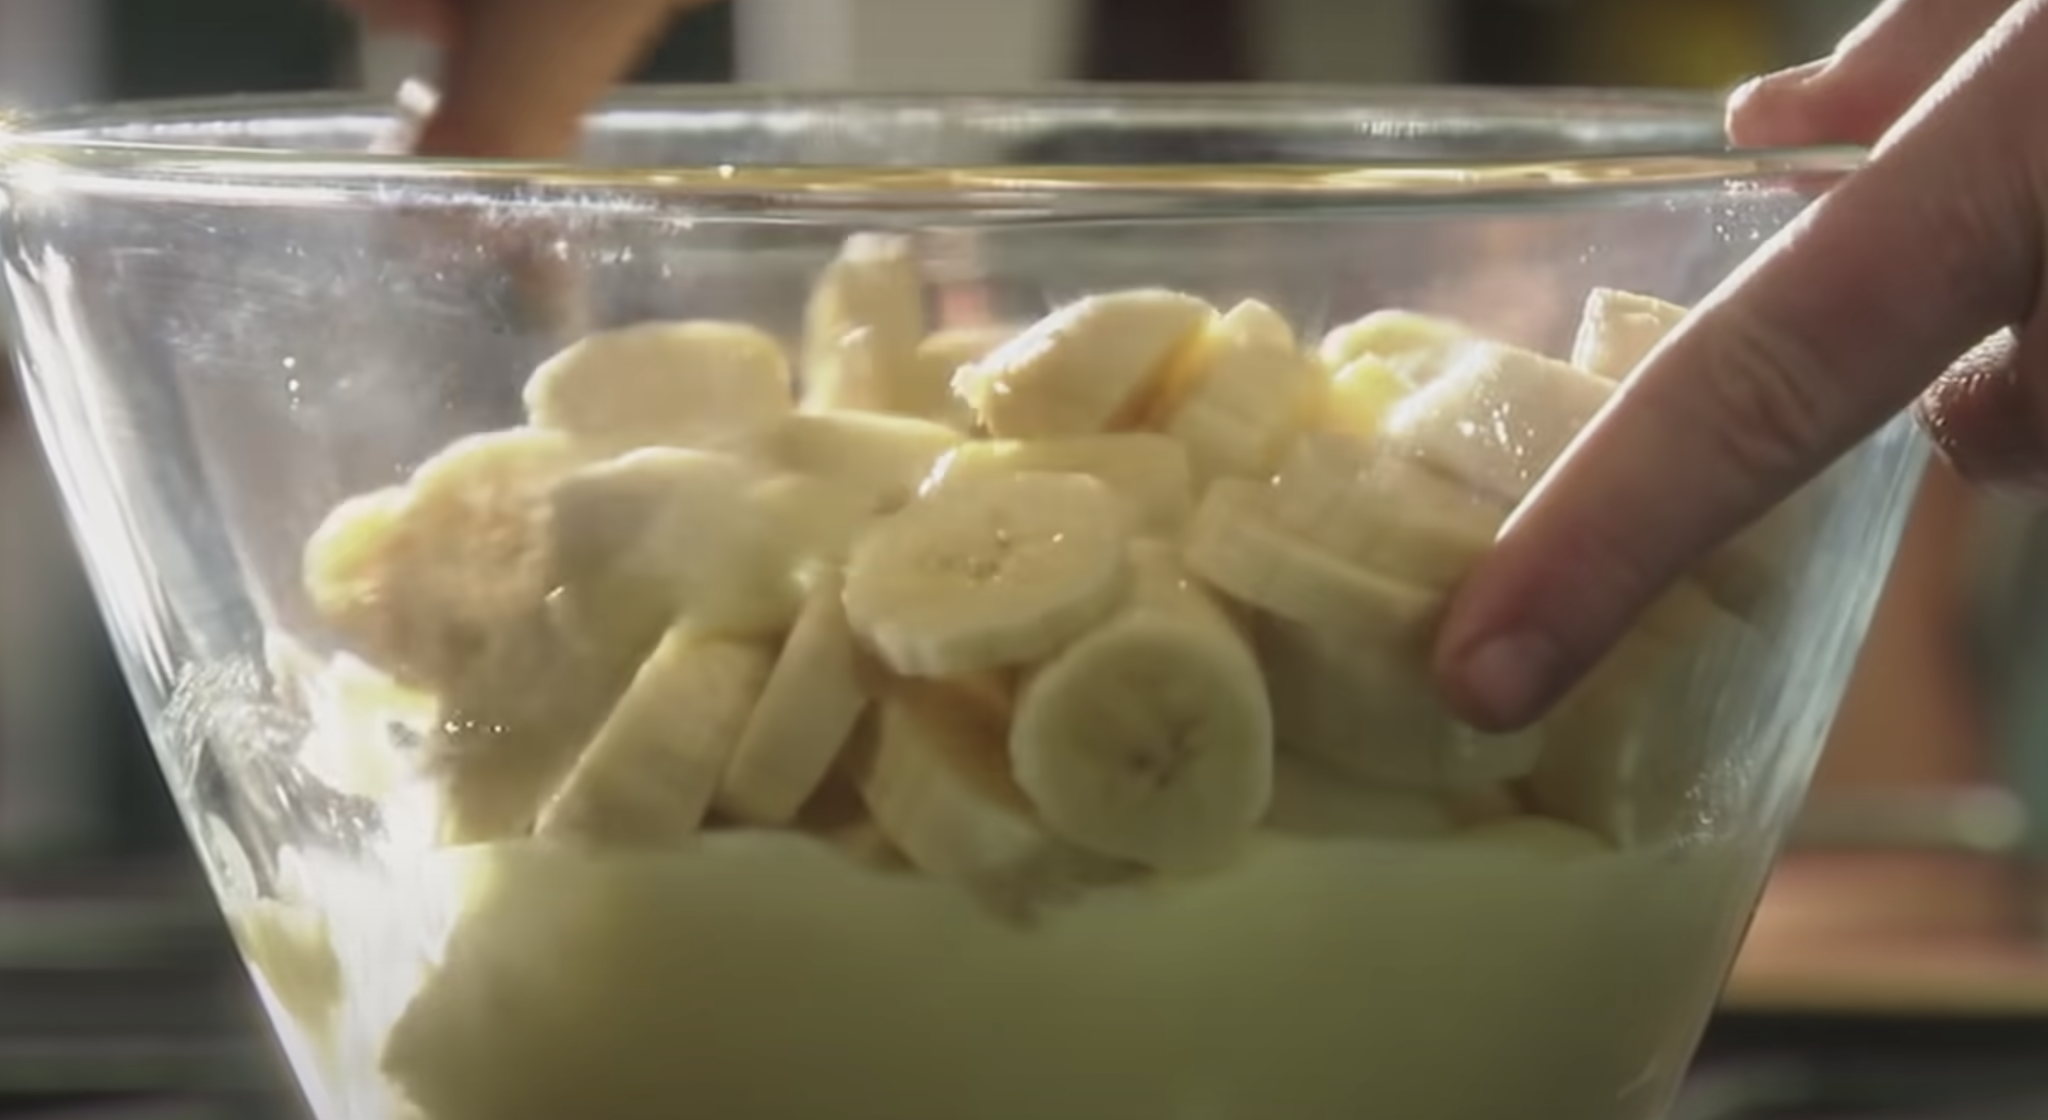 Cut-up bananas layered on top of pudding